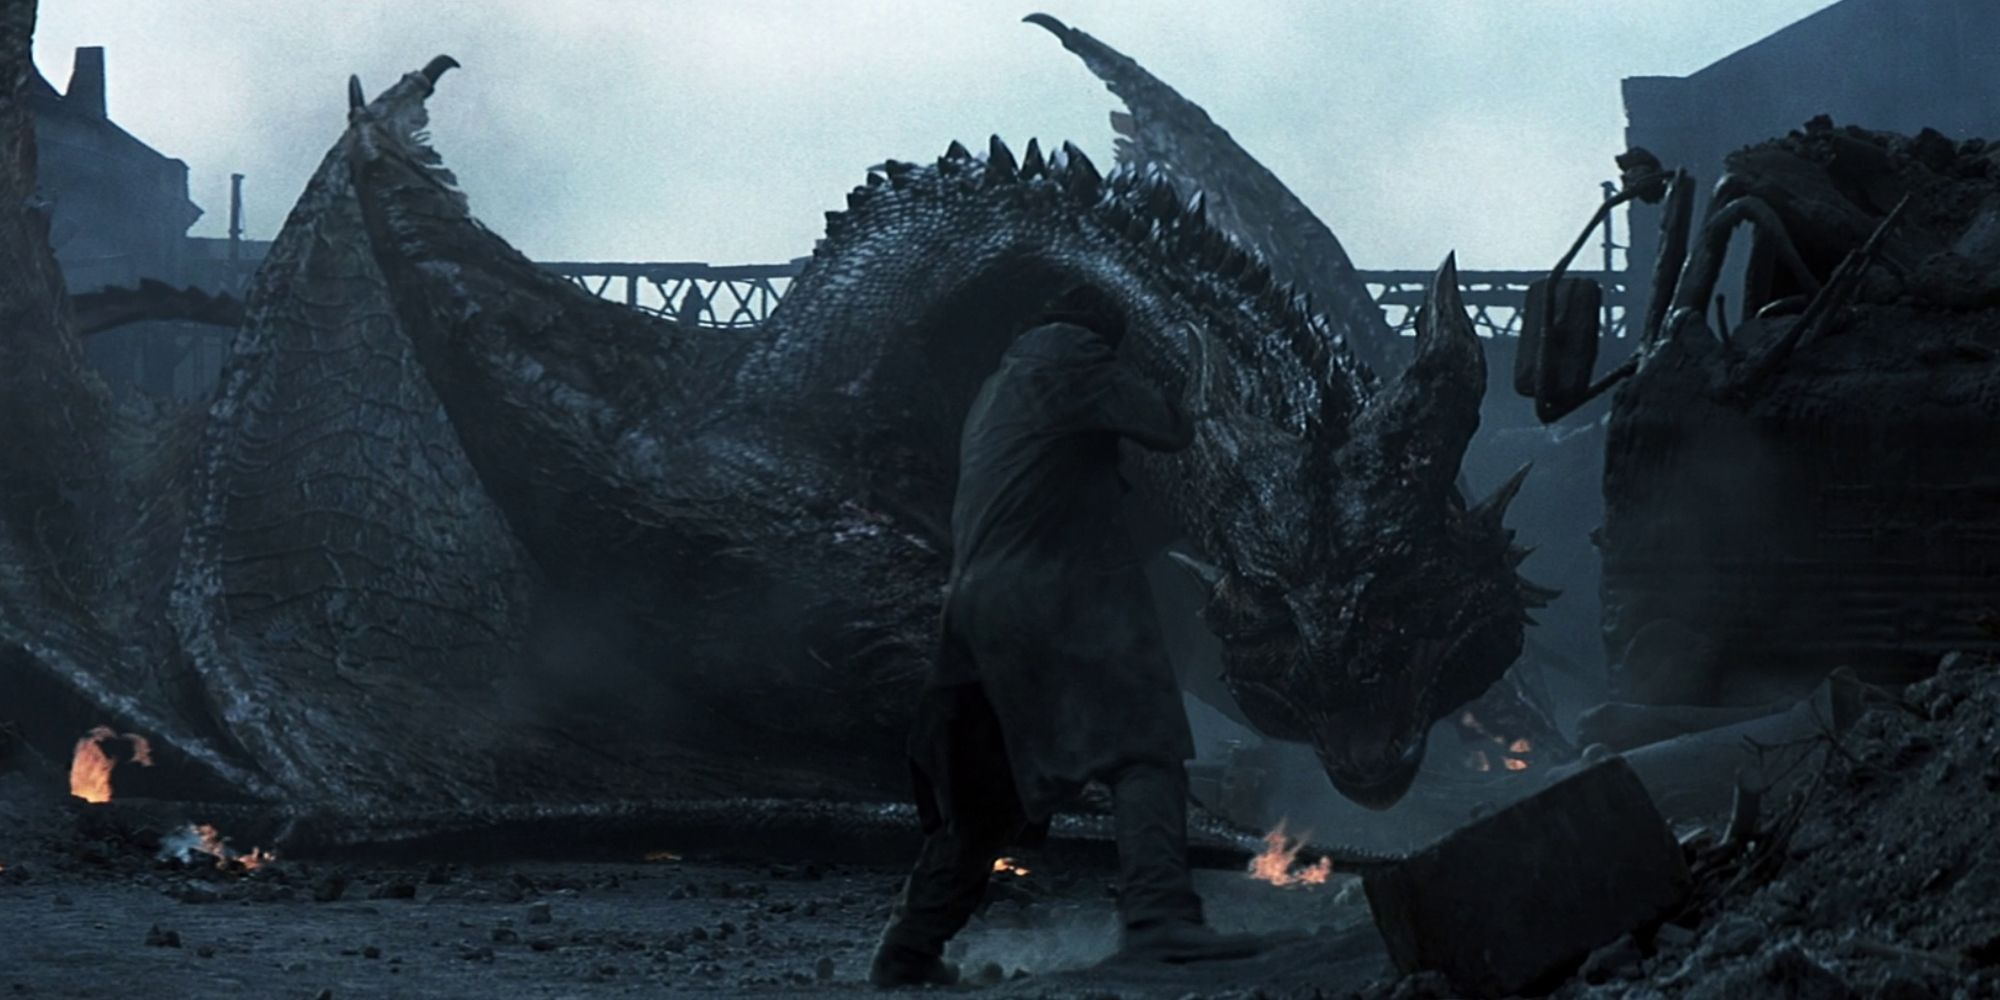 Christian Bale's Ambercromby faces off against a dragon